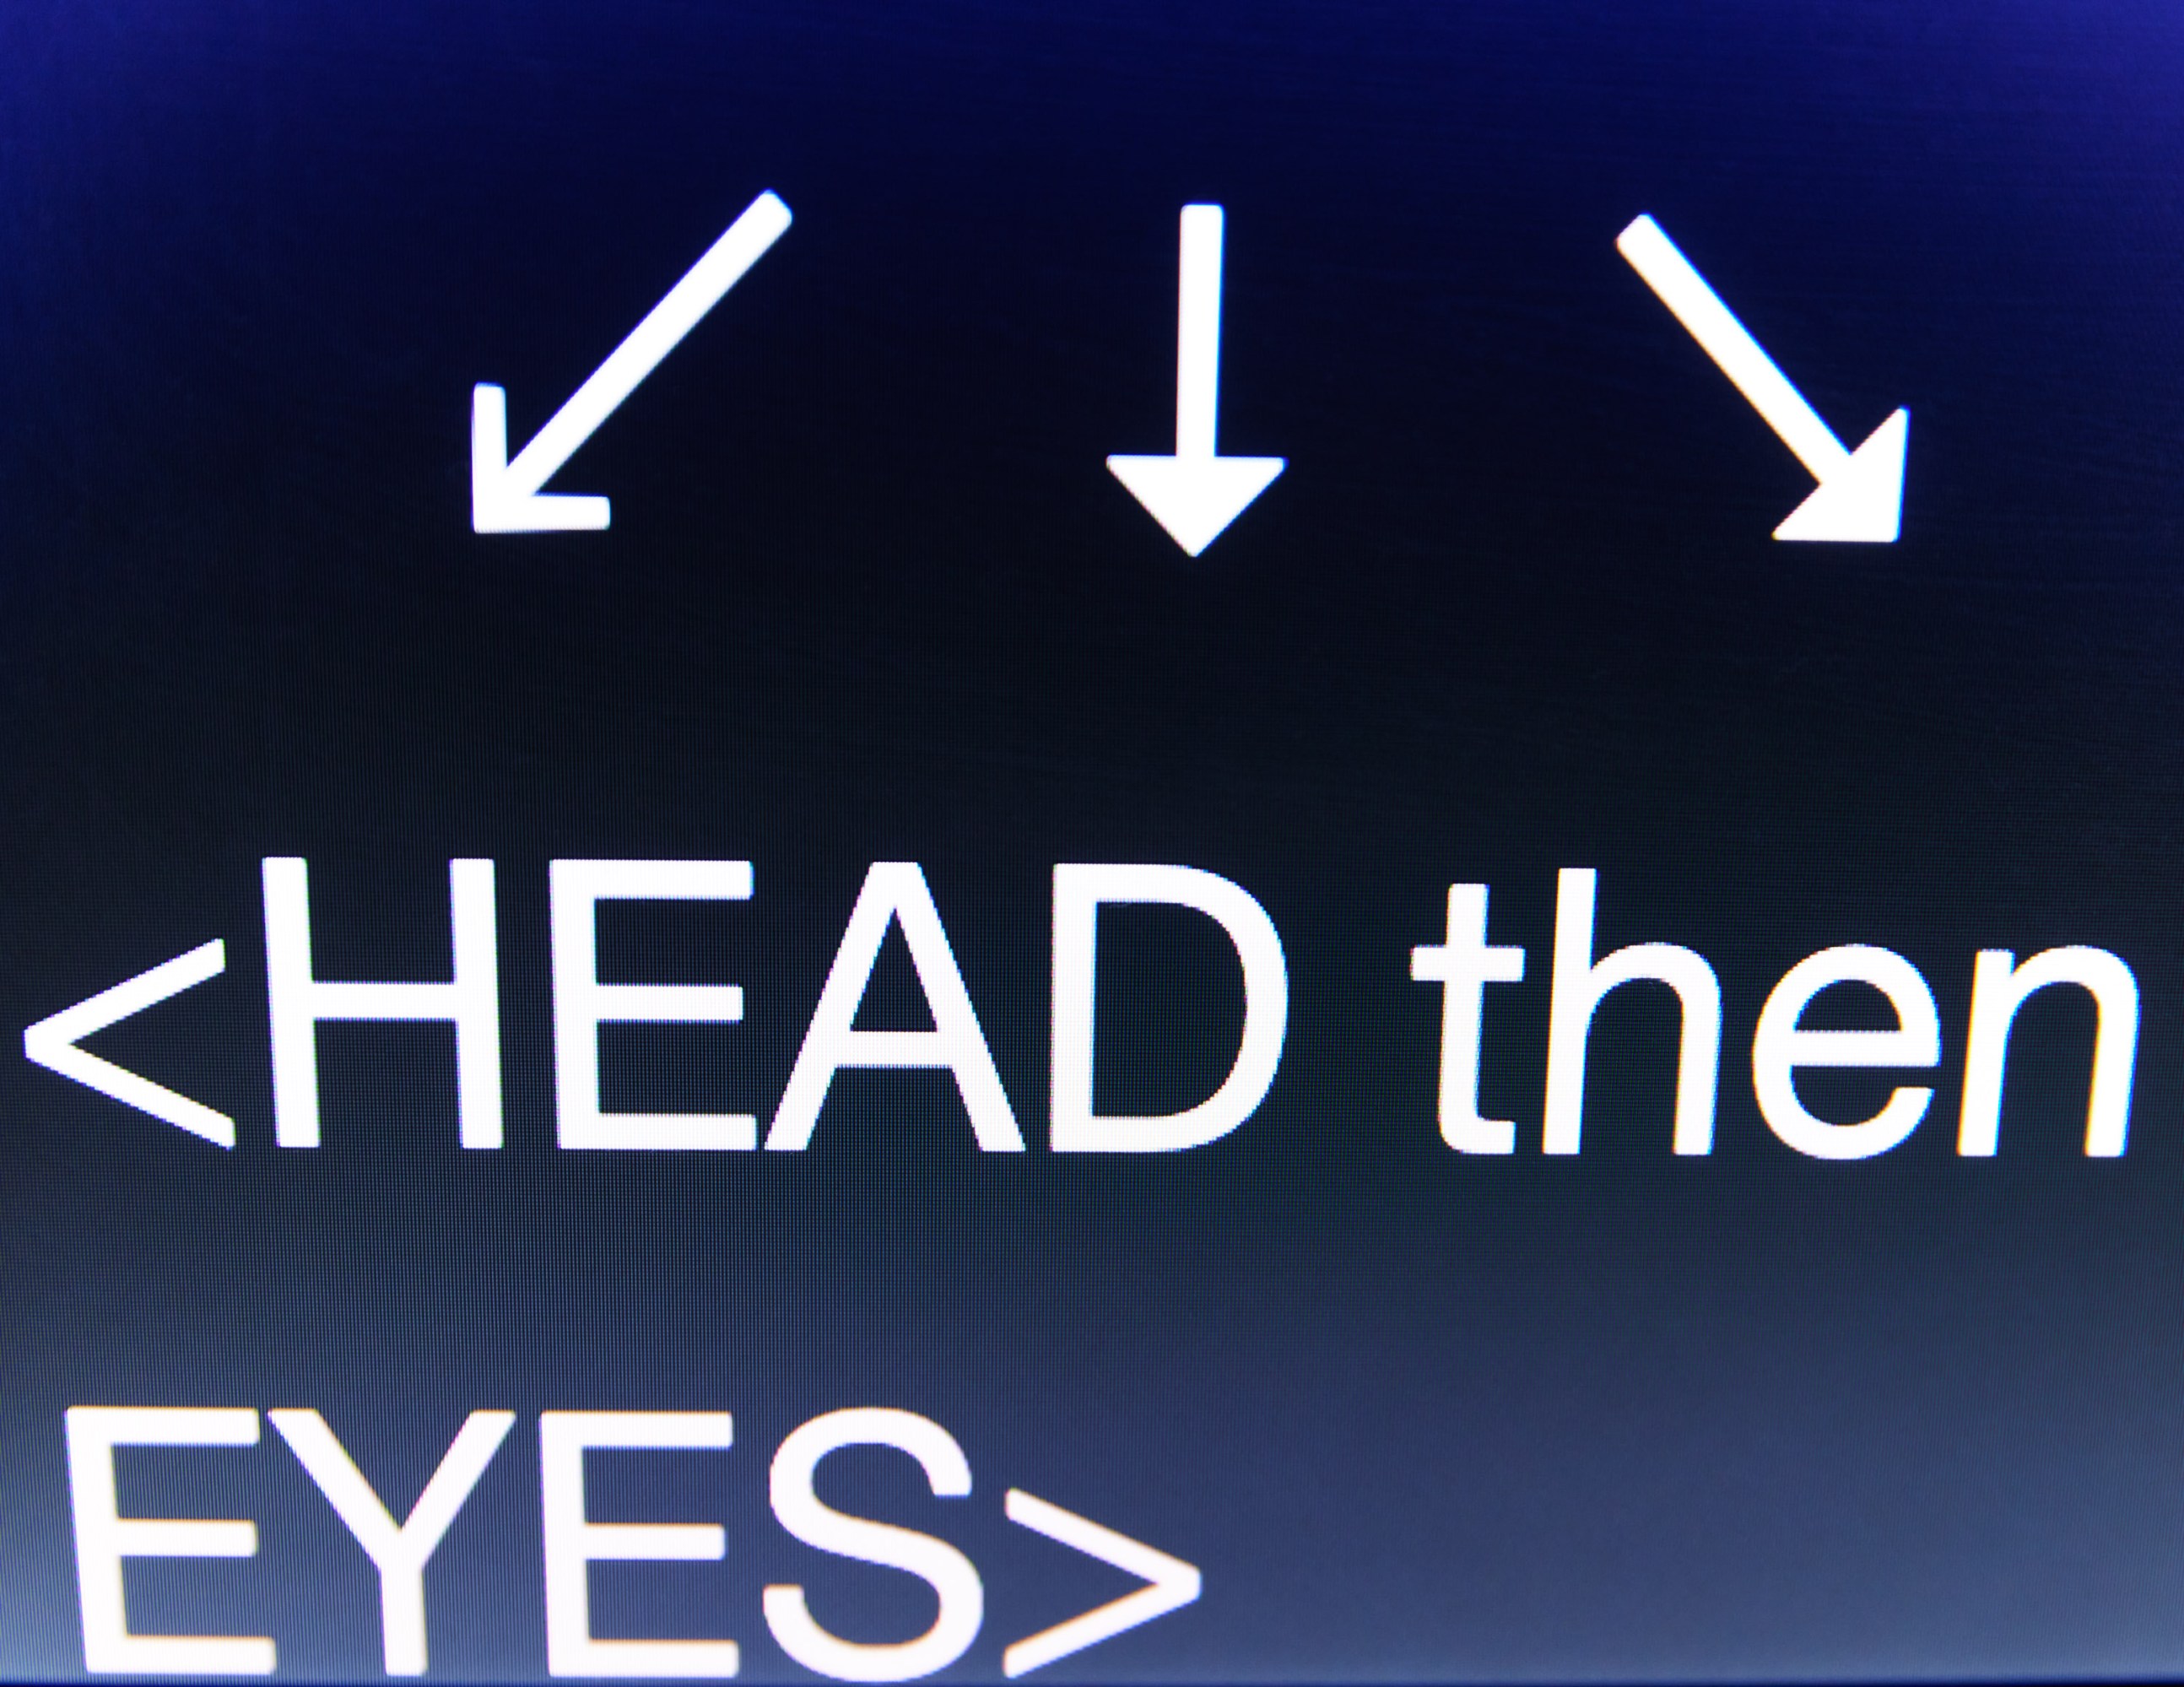 photograph of a teleprompter screen with three arrows pointing down to "HEAD then EYES>"